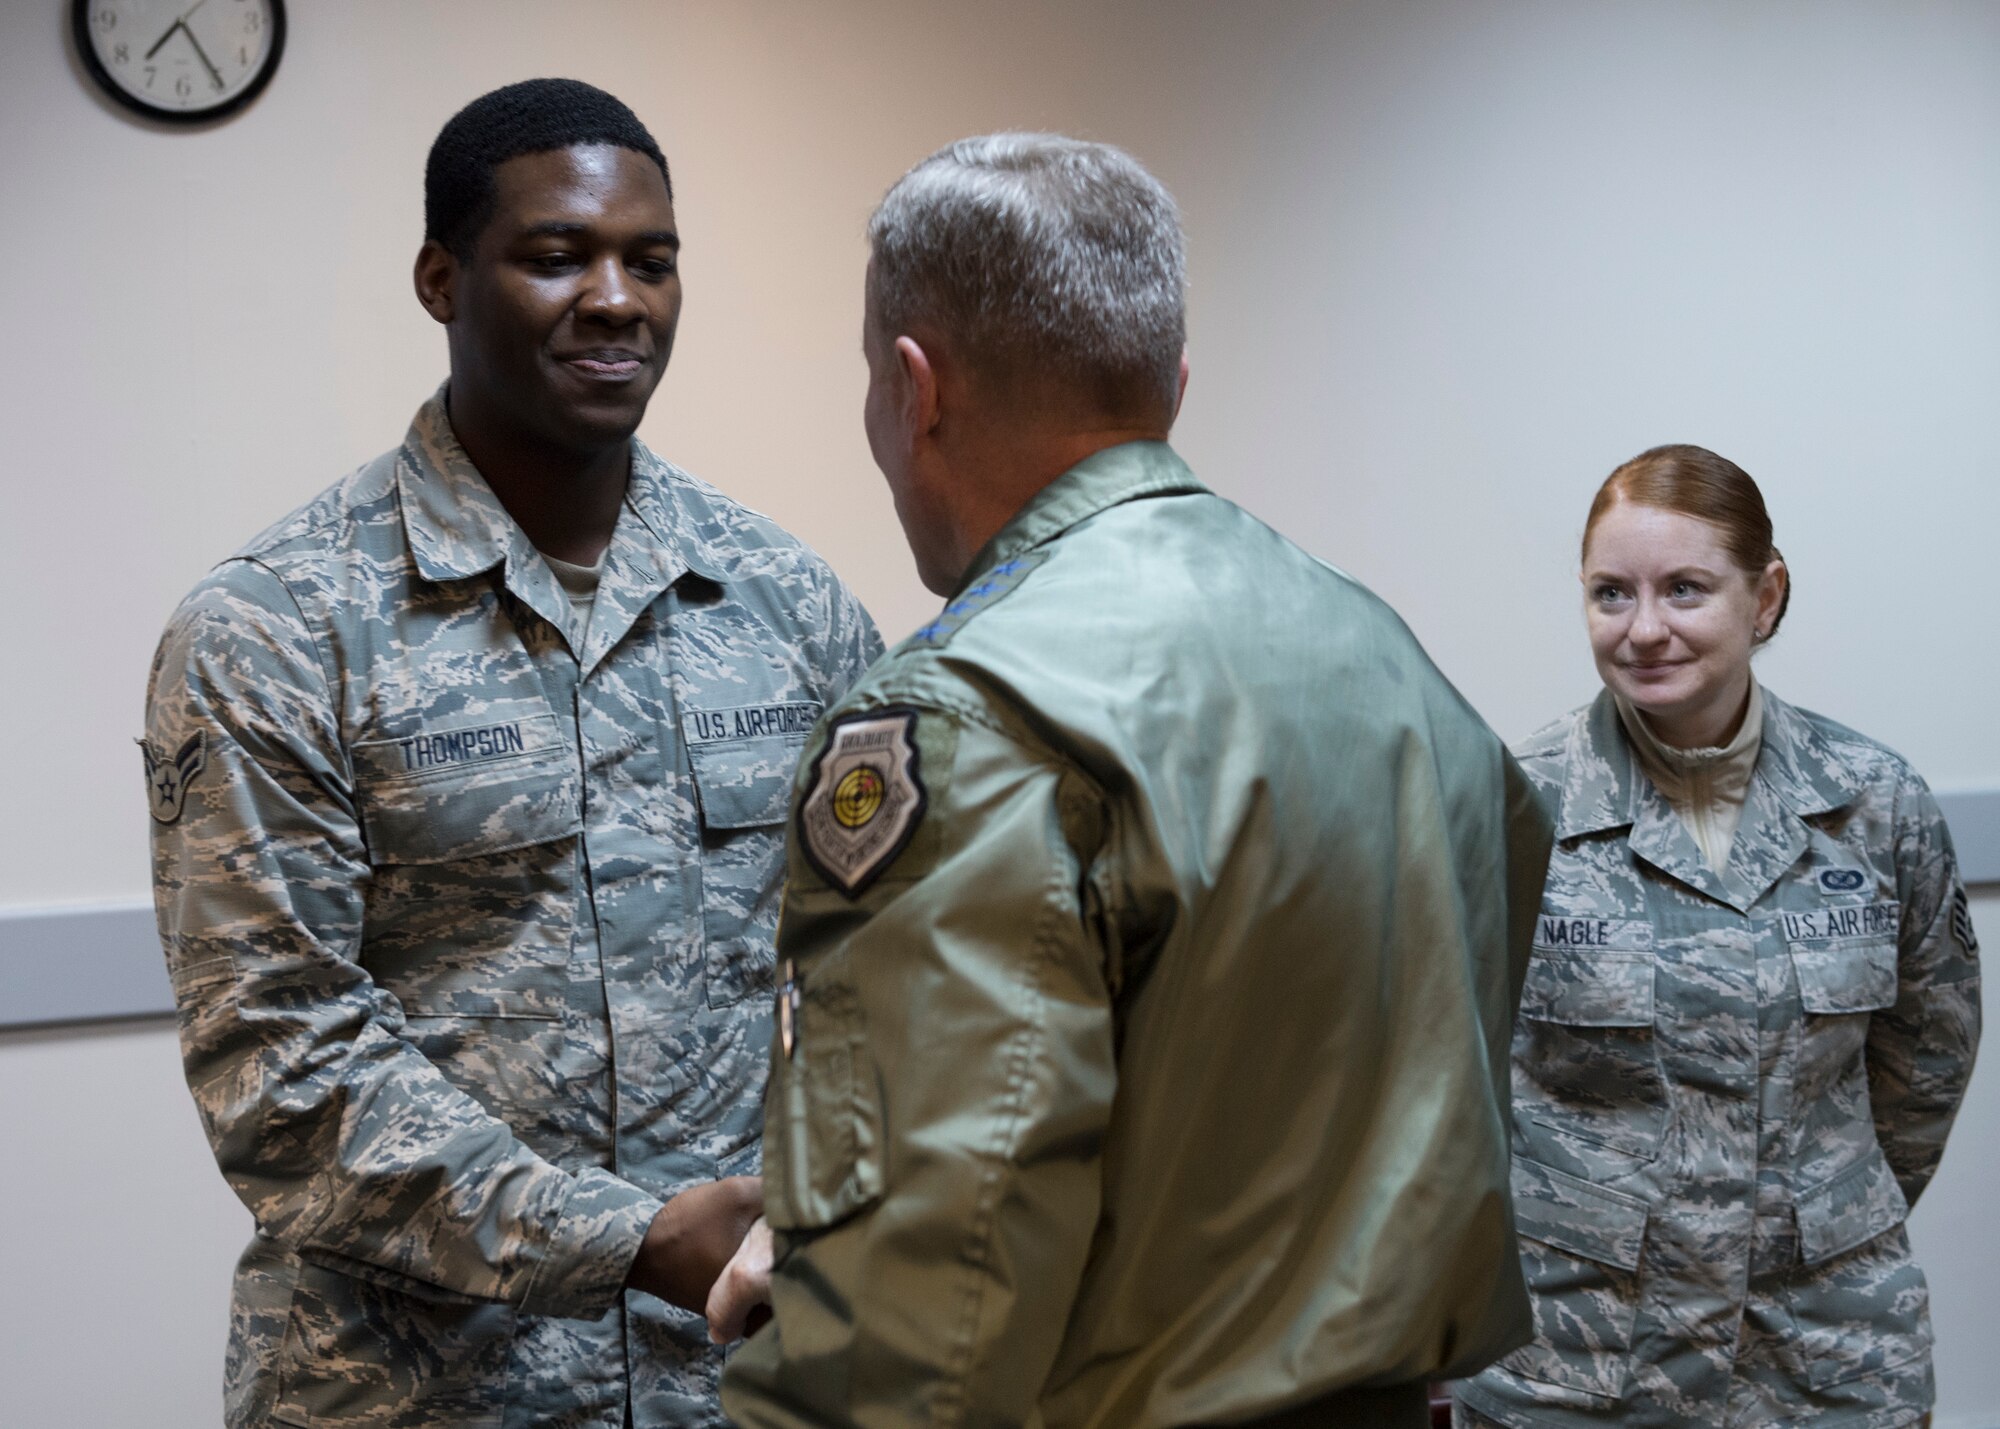 U.S. Air Force Airman 1st Class Octavius Thompson receives a coin from U.S. Air Force Gen. Tod D. Wolters.